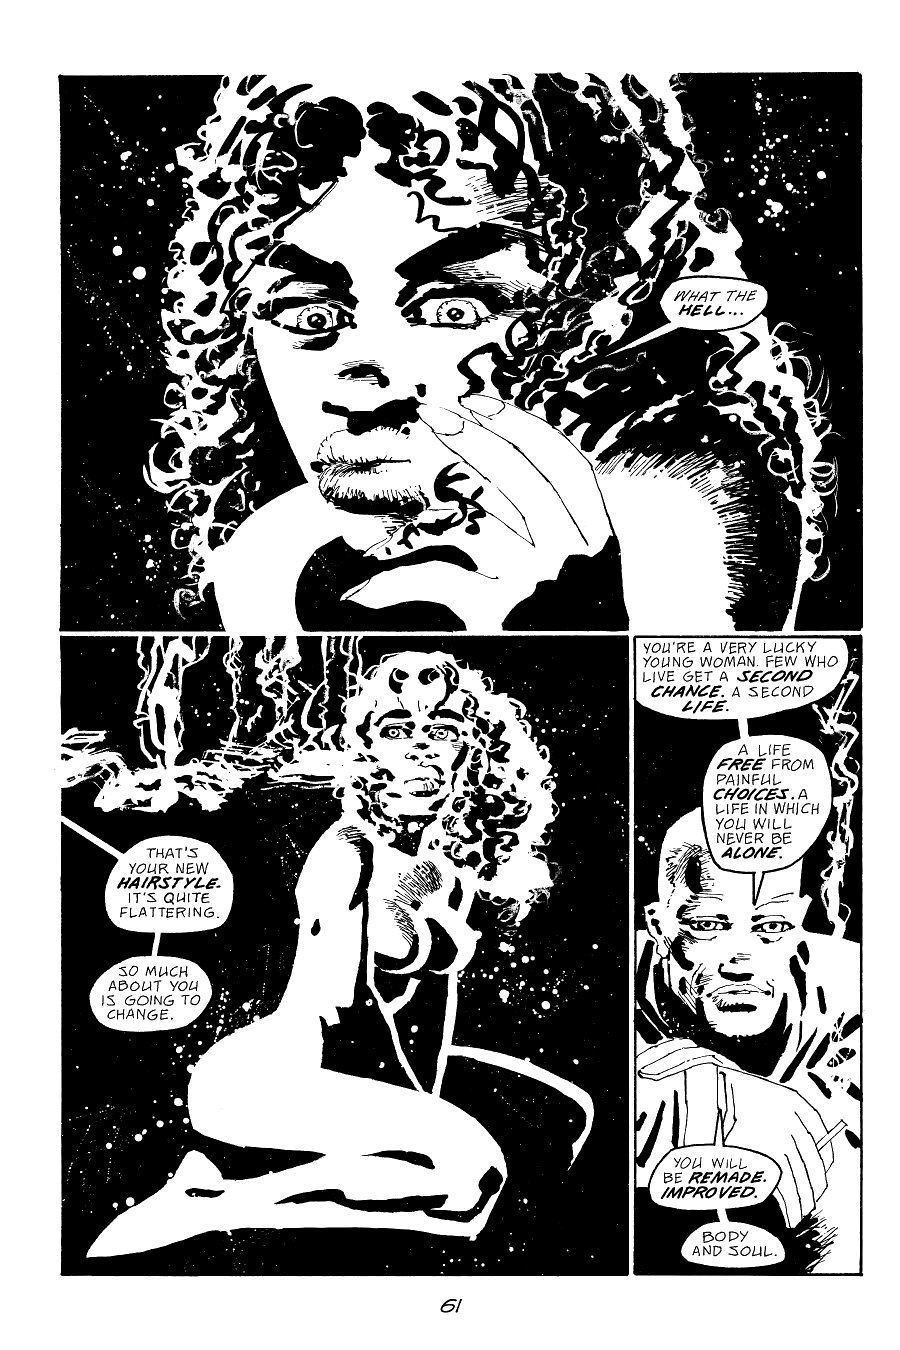 page 61 of sin city 7 hell and back